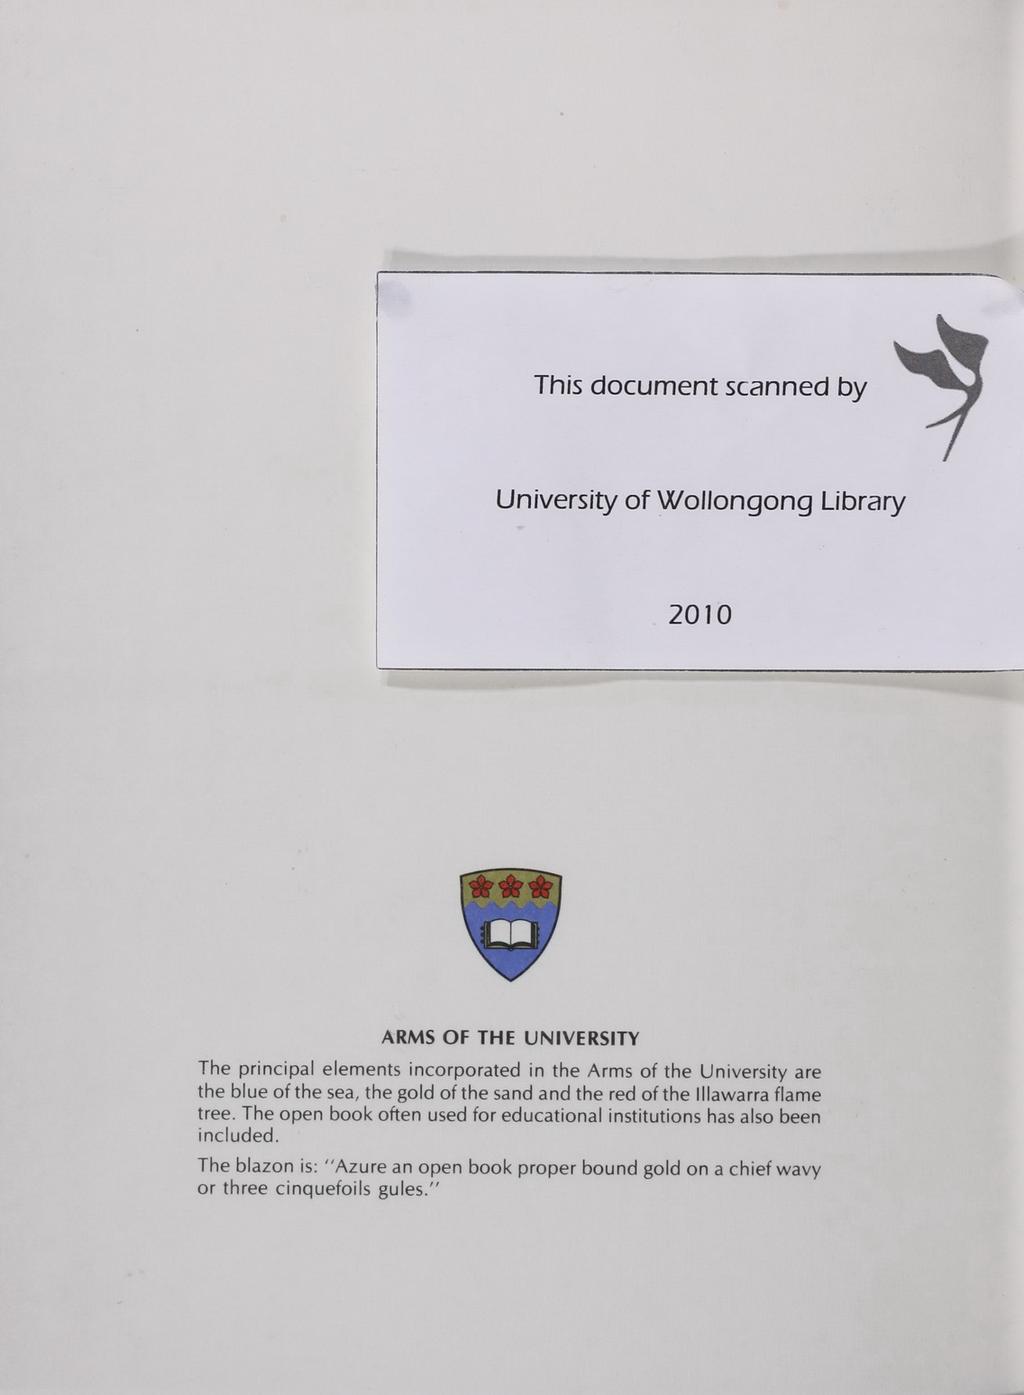 I I This document scanned by University of WOllongong Library 2010 ARMS OF TH E UNIVE RSITY The principa l elements incorporated in the Arms of the Unive rsity are the blue of the sea, the gold of